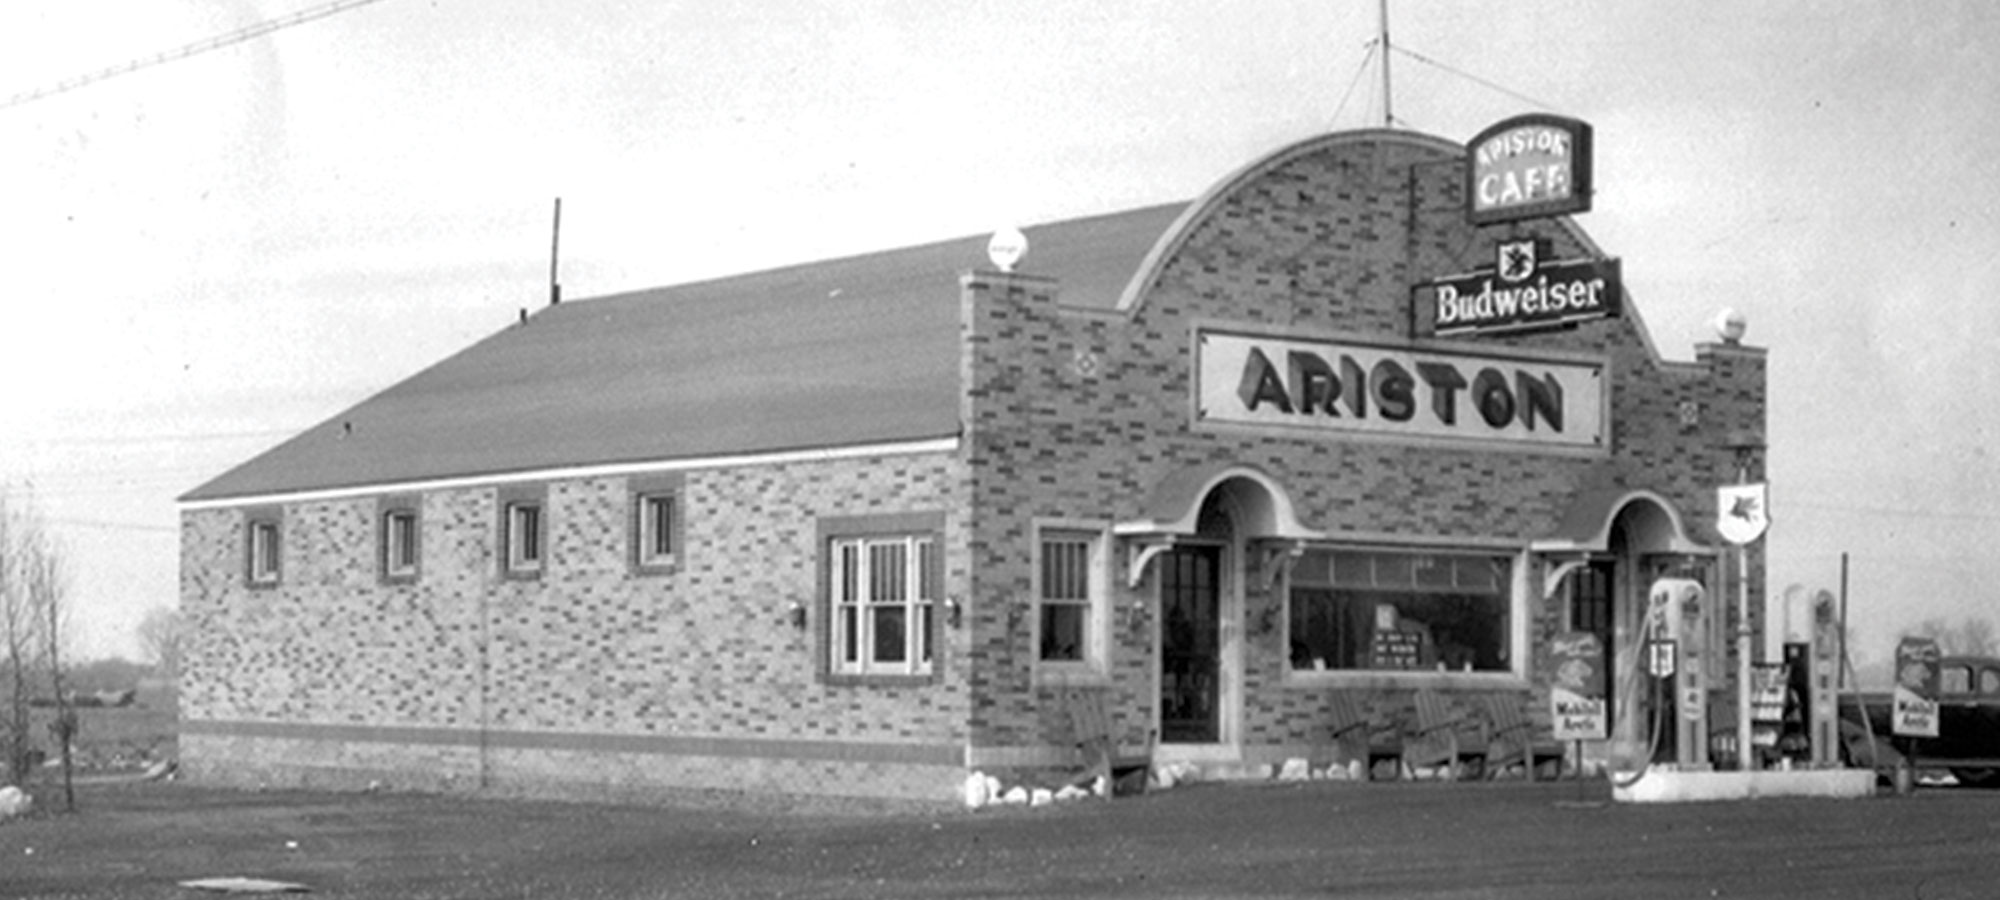 Vintage Photograph of the Ariston Cafe